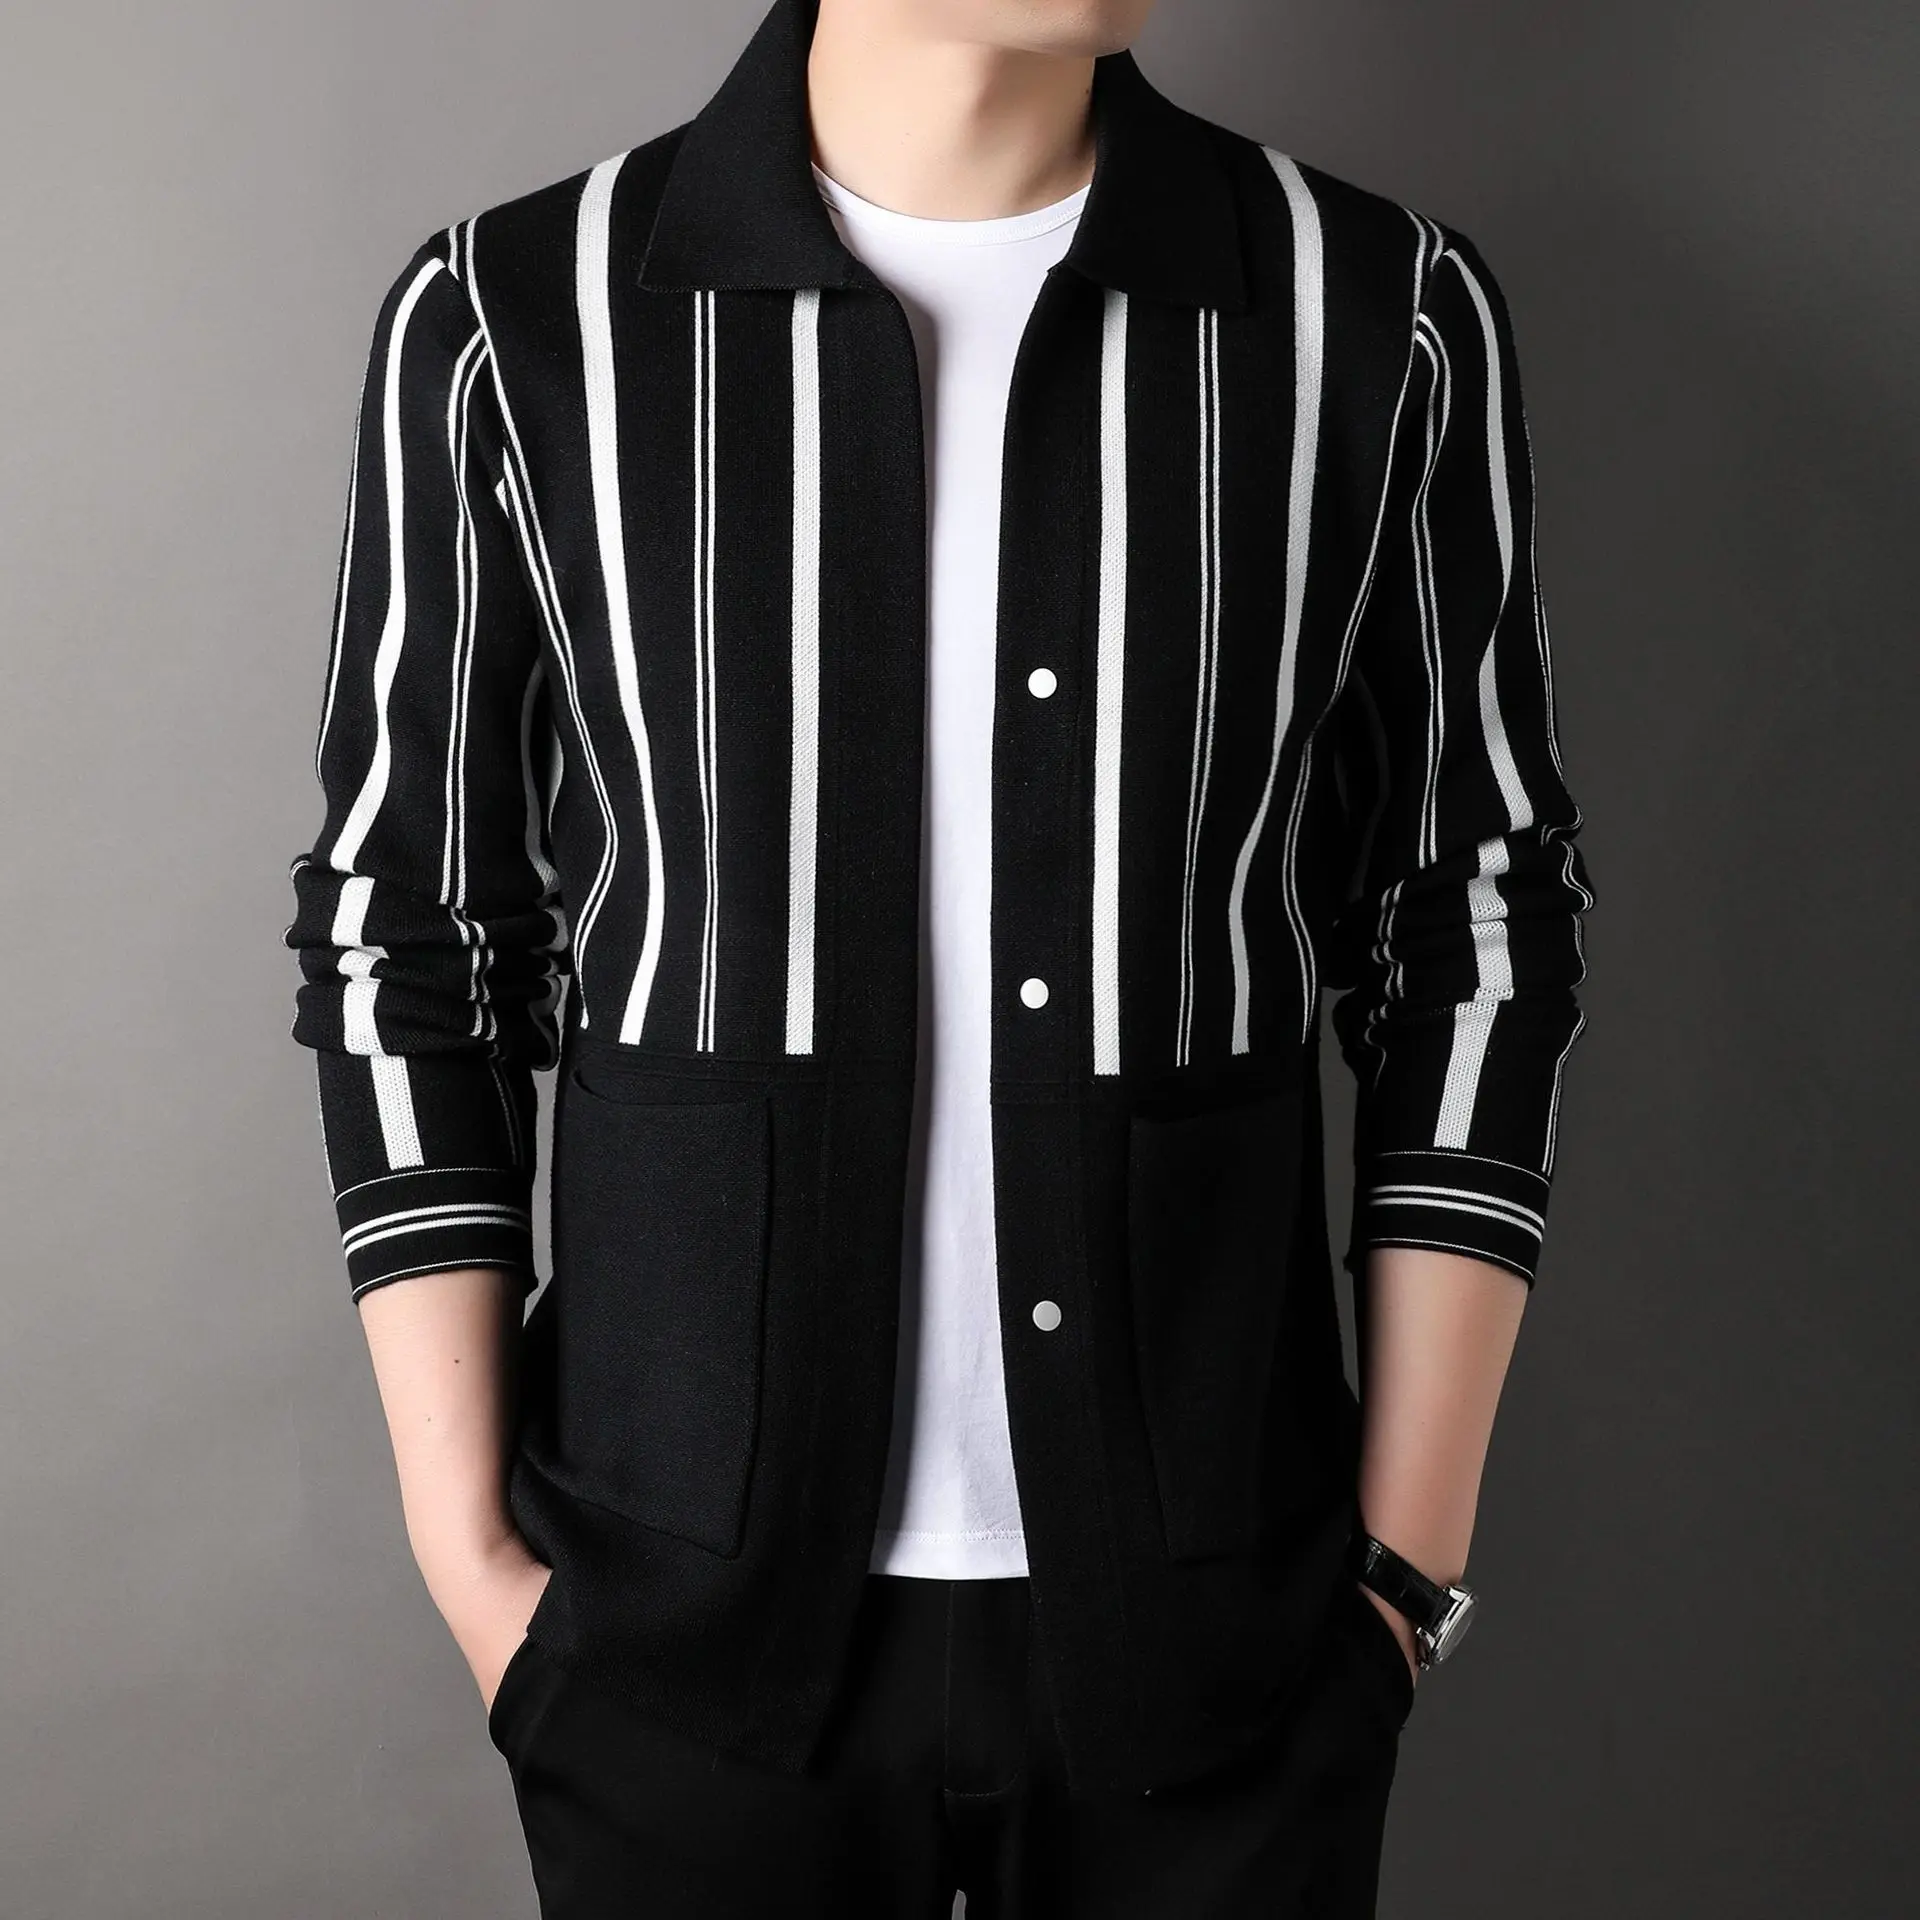 Men's Striped Cardigan Autumn and Winter New Korean Style Lapel Knitwear Long Sleeve Color Matching Daddy Outfit Coat Wholesale